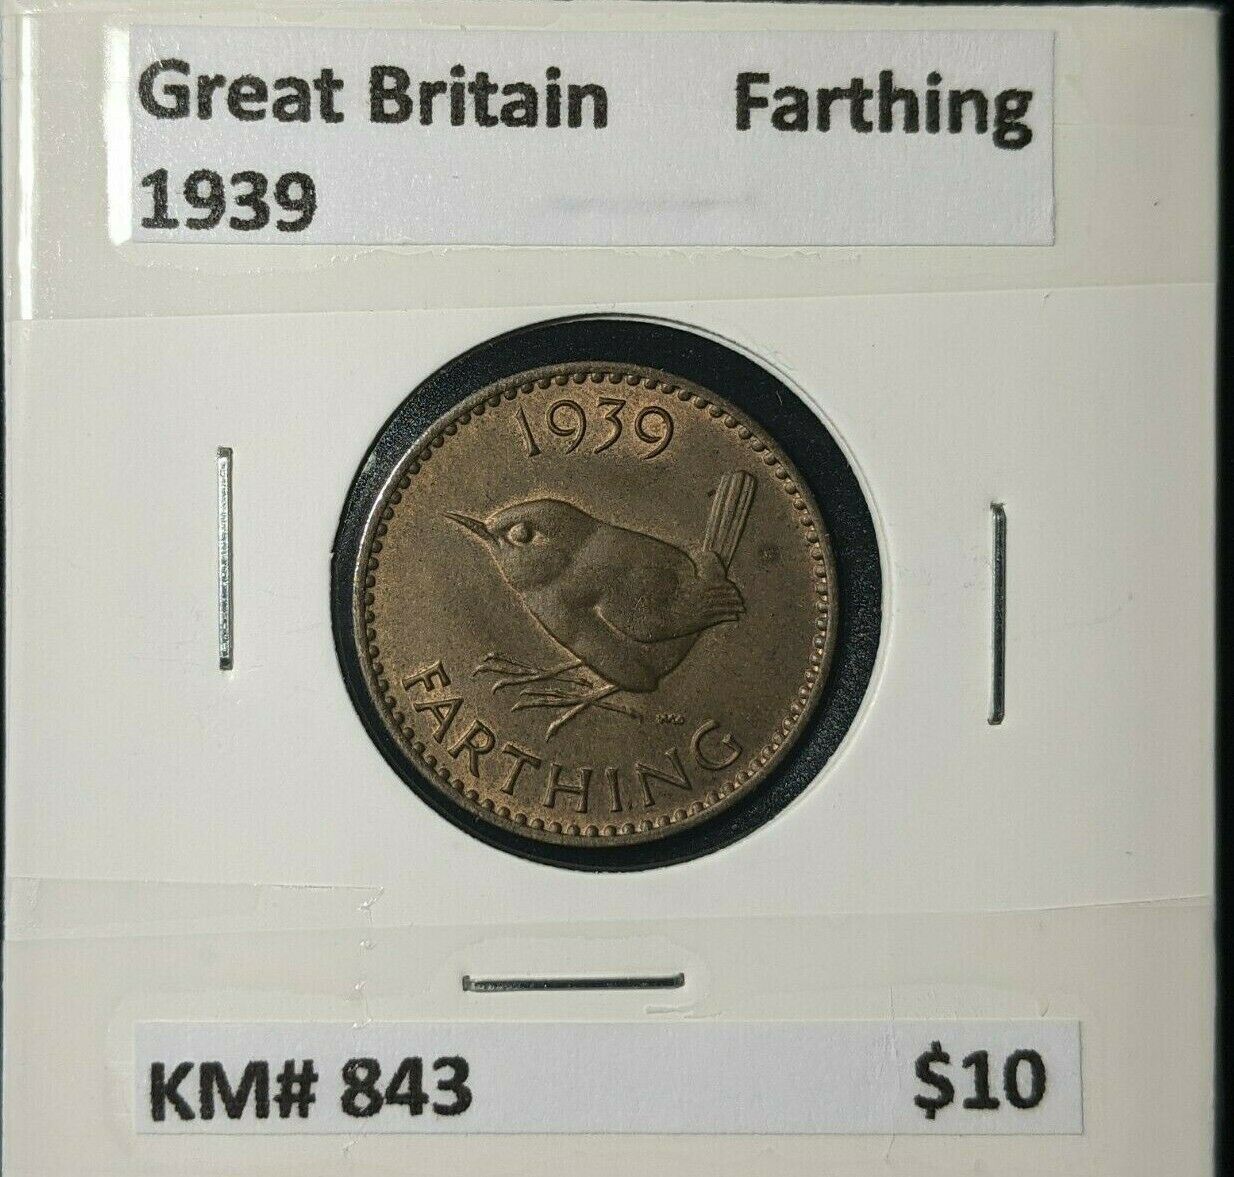 Great Britain 1939 1/4d Farthing KM# 843 #120